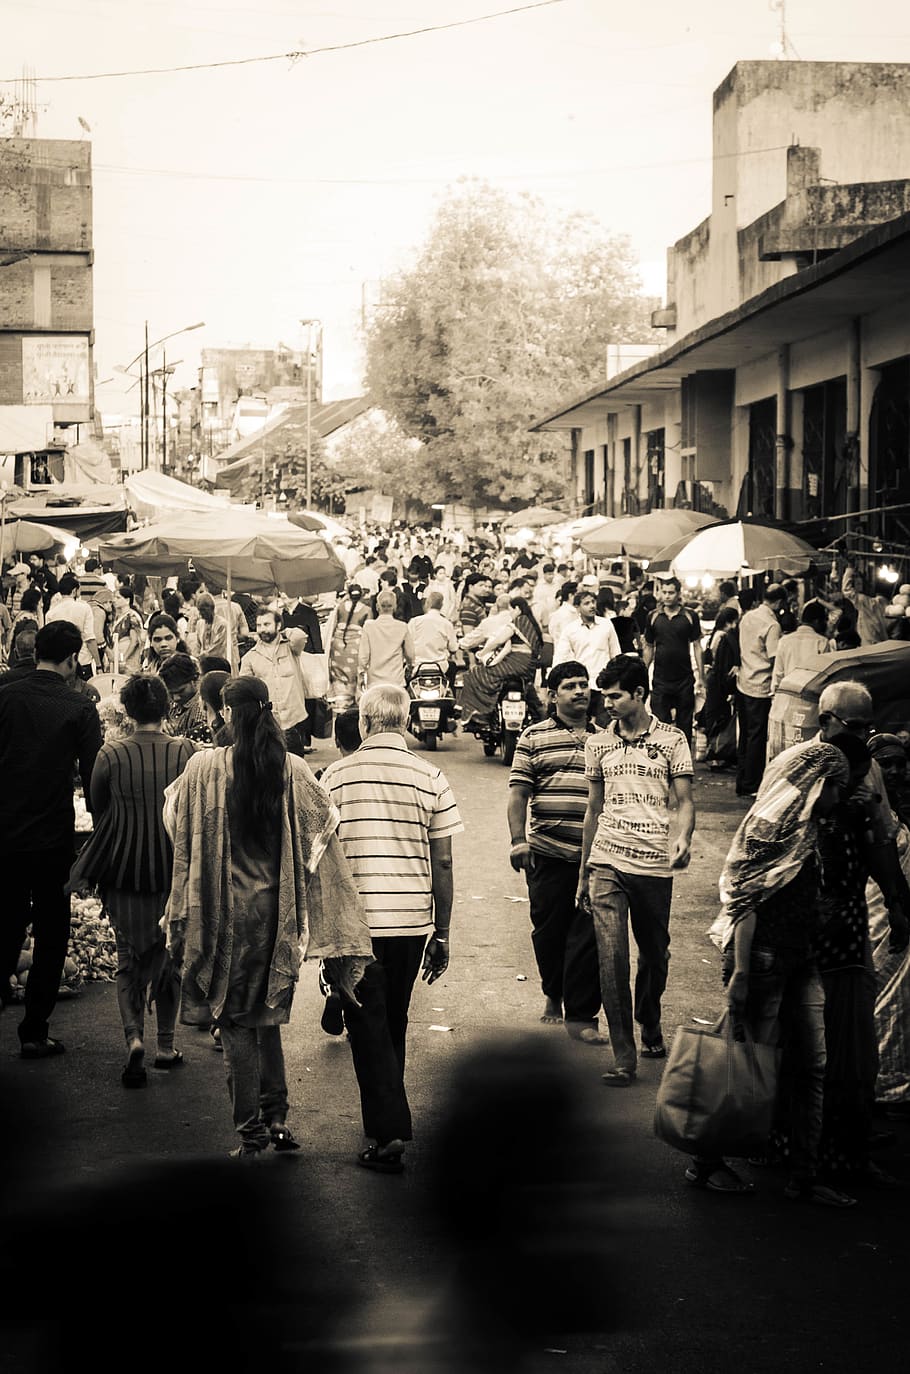 india, pune, sepia, color grading, busy, city, shopping, sillhouette